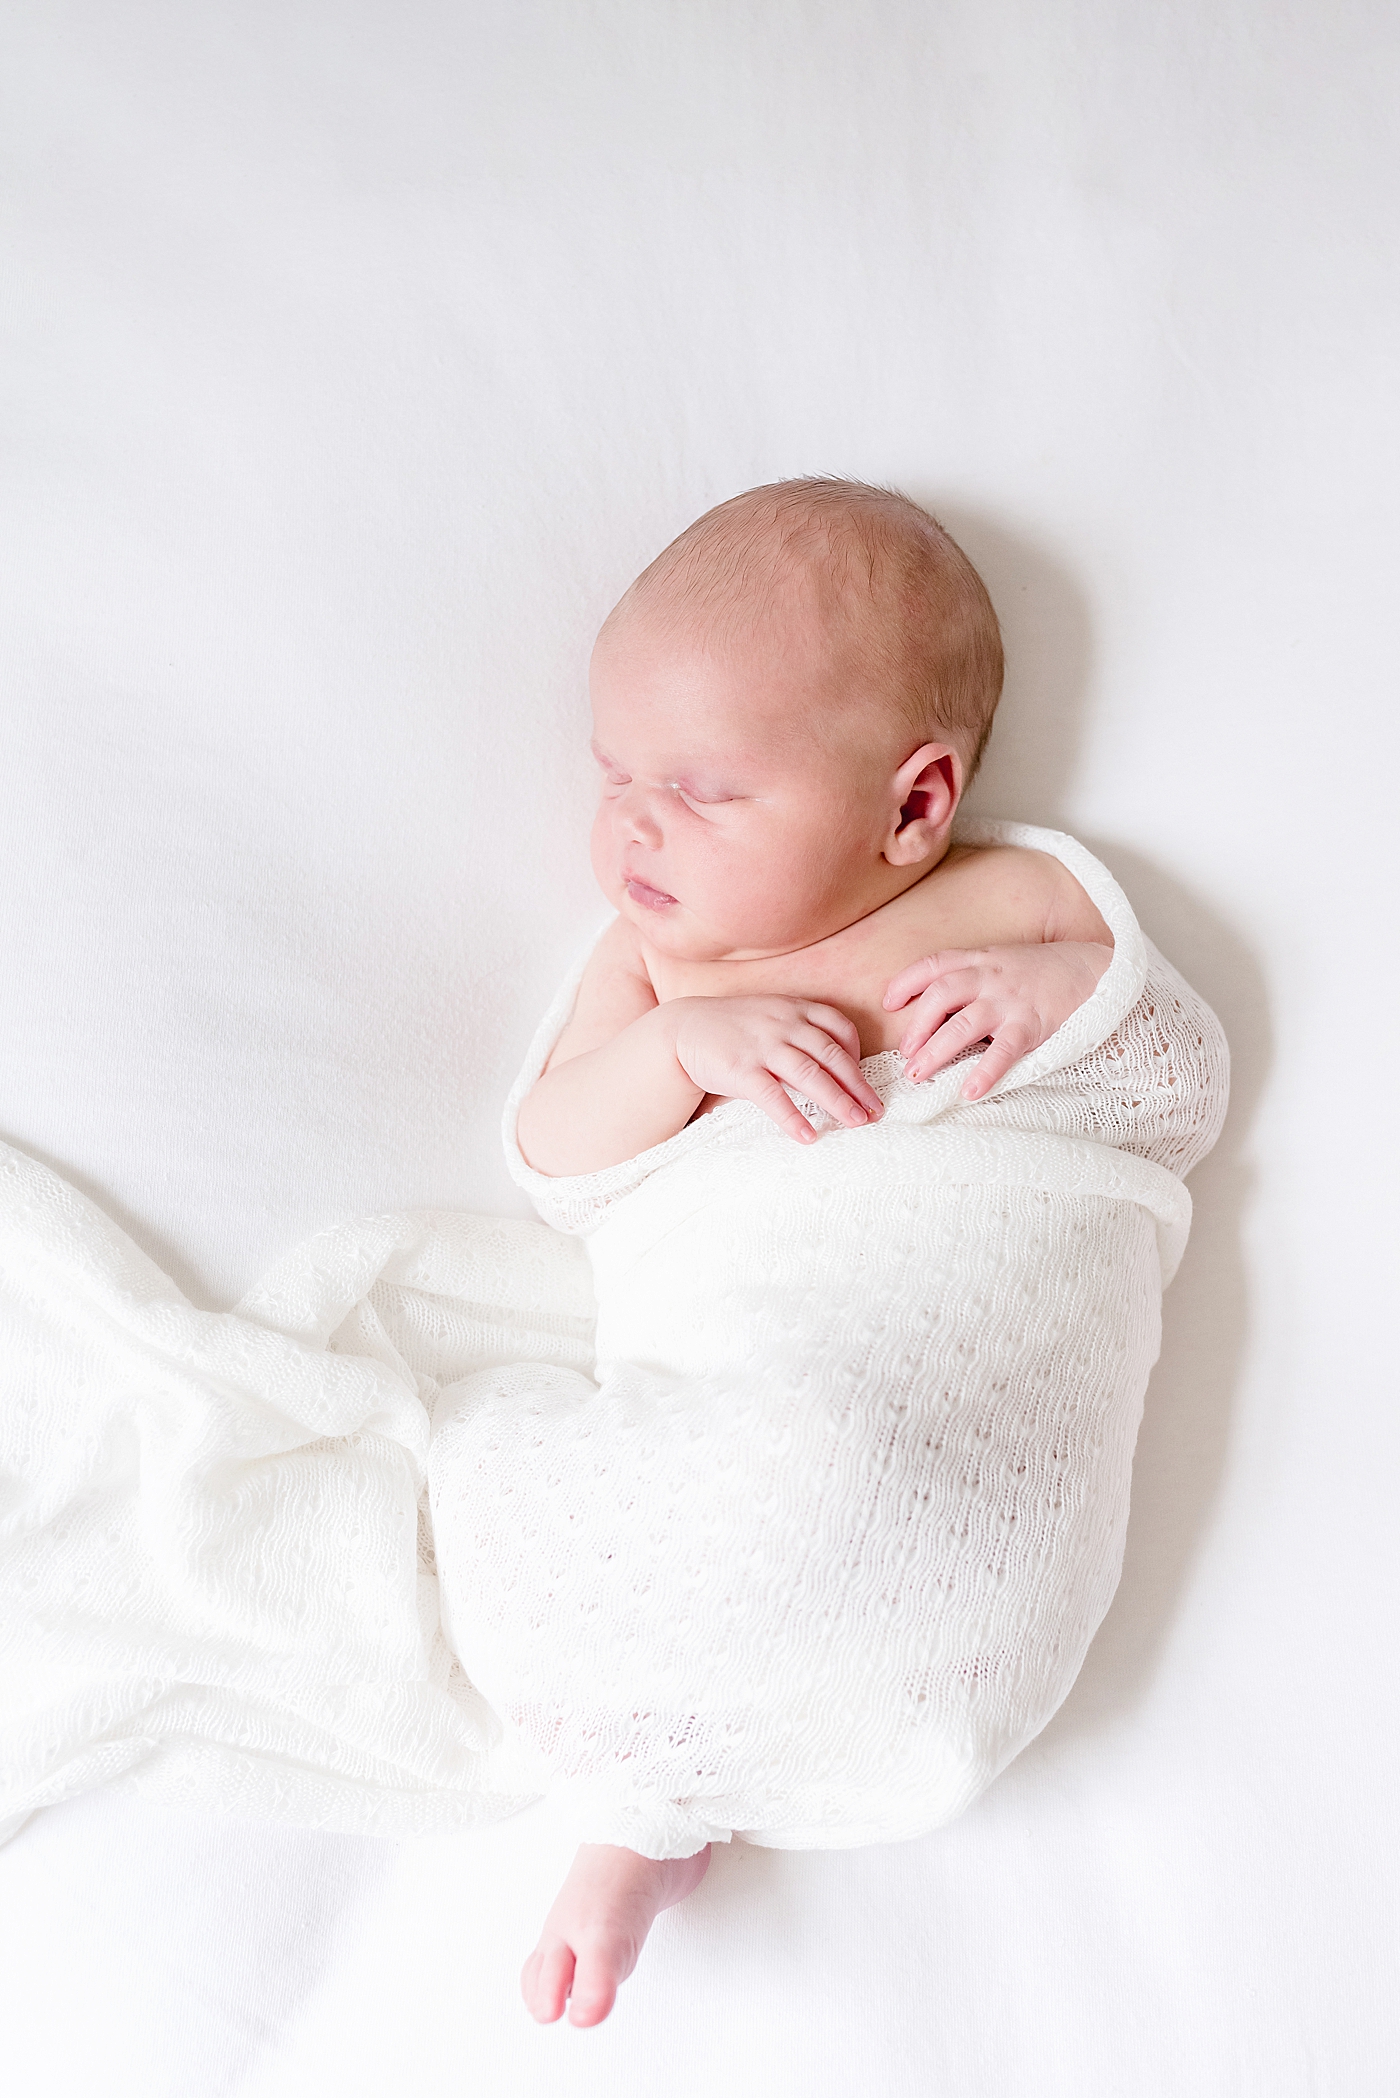 Newborn baby girl wrapped in a swaddle | Photo by Anna Wisjo Photography